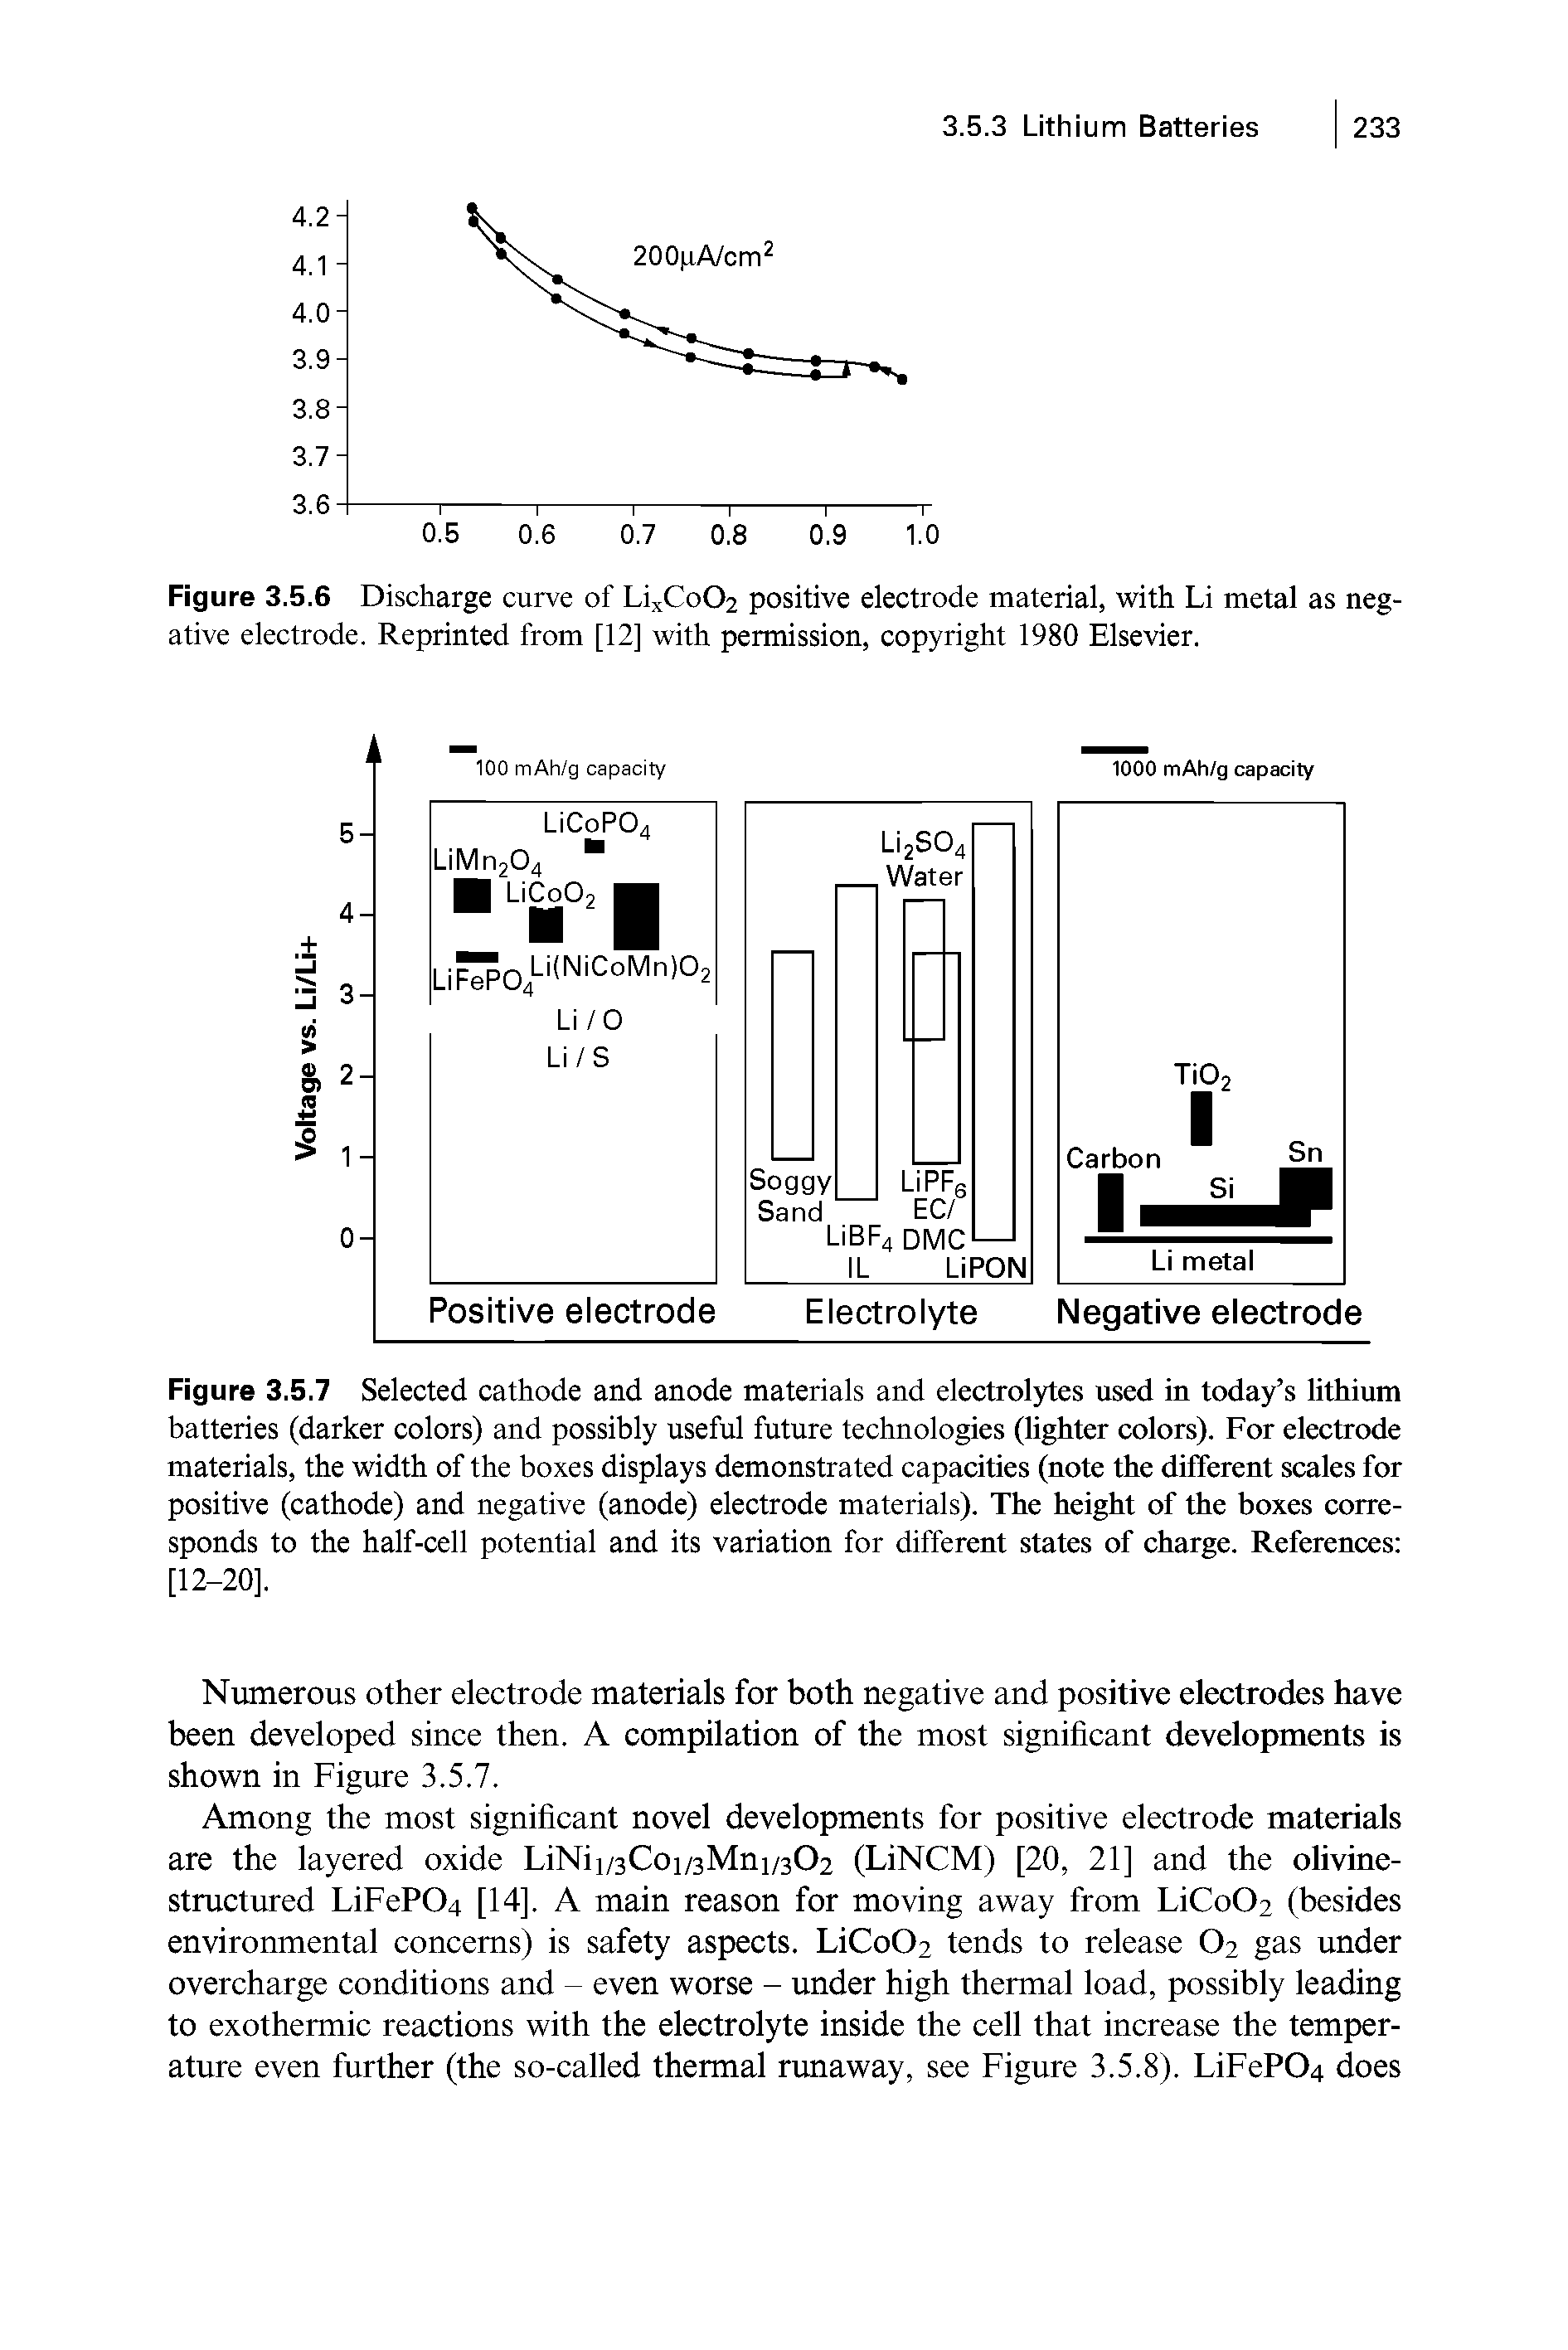 Figure 3.5.6 Discharge curve of LixCoC>2 positive electrode material, with Li metal as negative electrode. Reprinted from [12] with permission, copyright 1980 Elsevier.